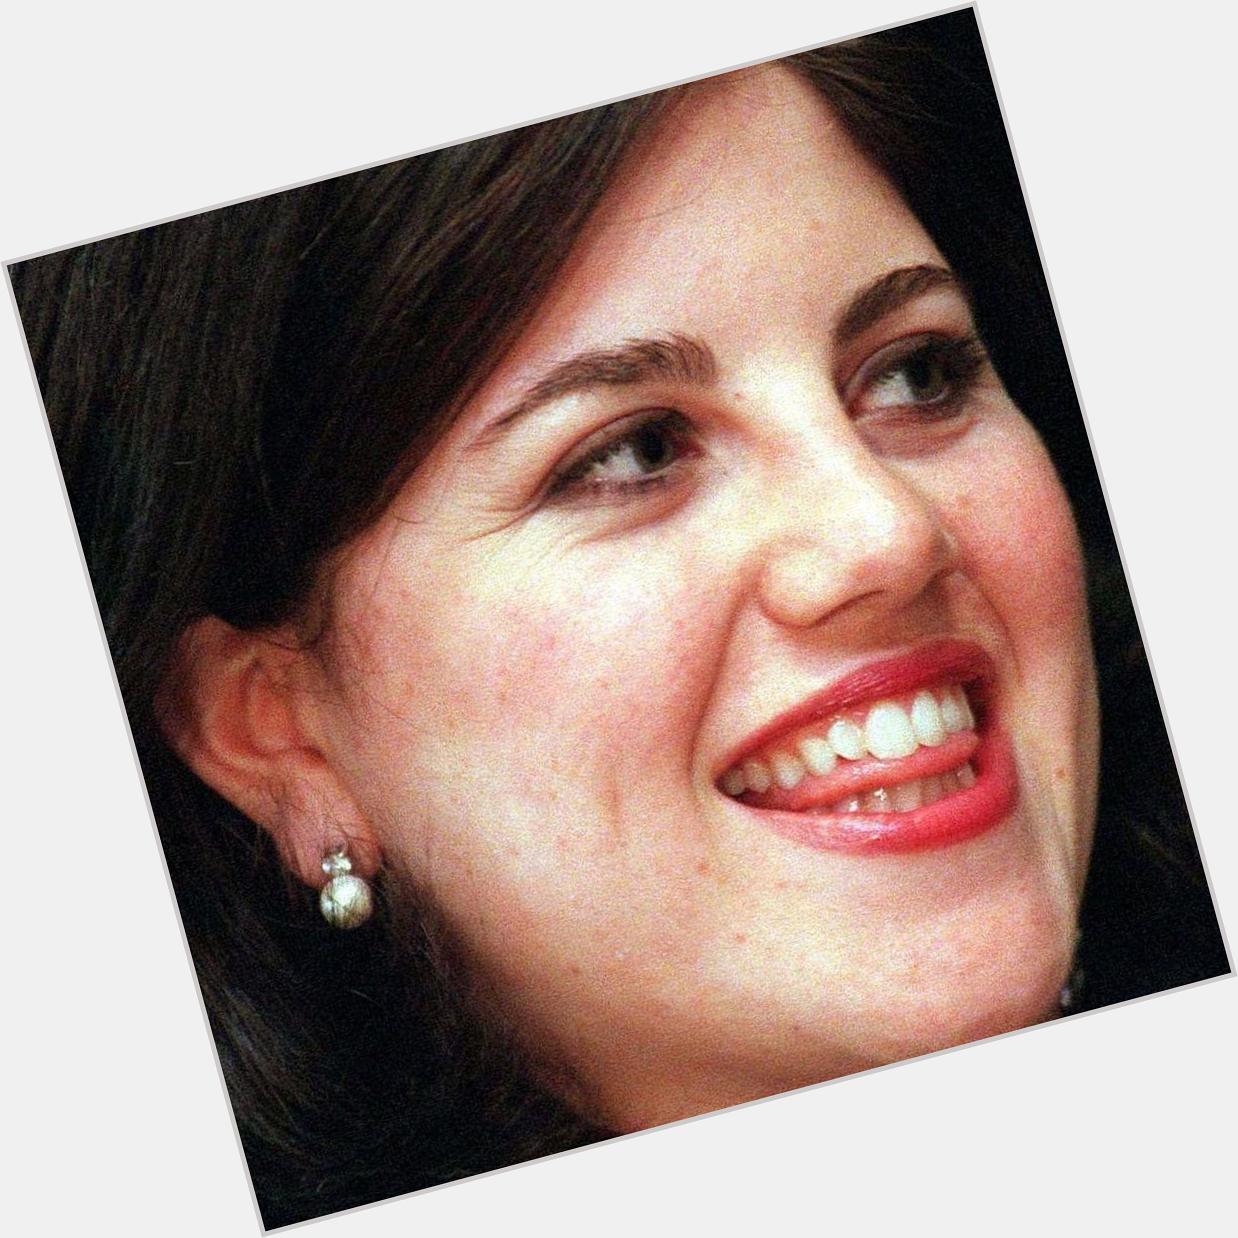 Happy birthday Monica Lewinsky government hoe all y\all hoes want to be like her 